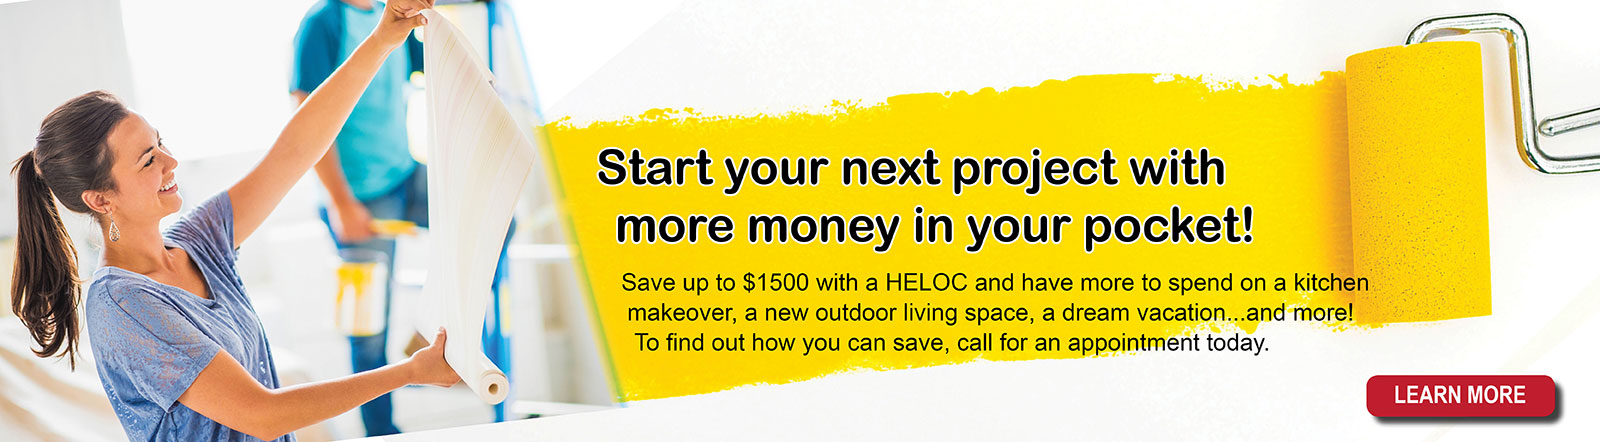 Start your next project with more money in your pocket. Save up to $1500 with a HELOC.